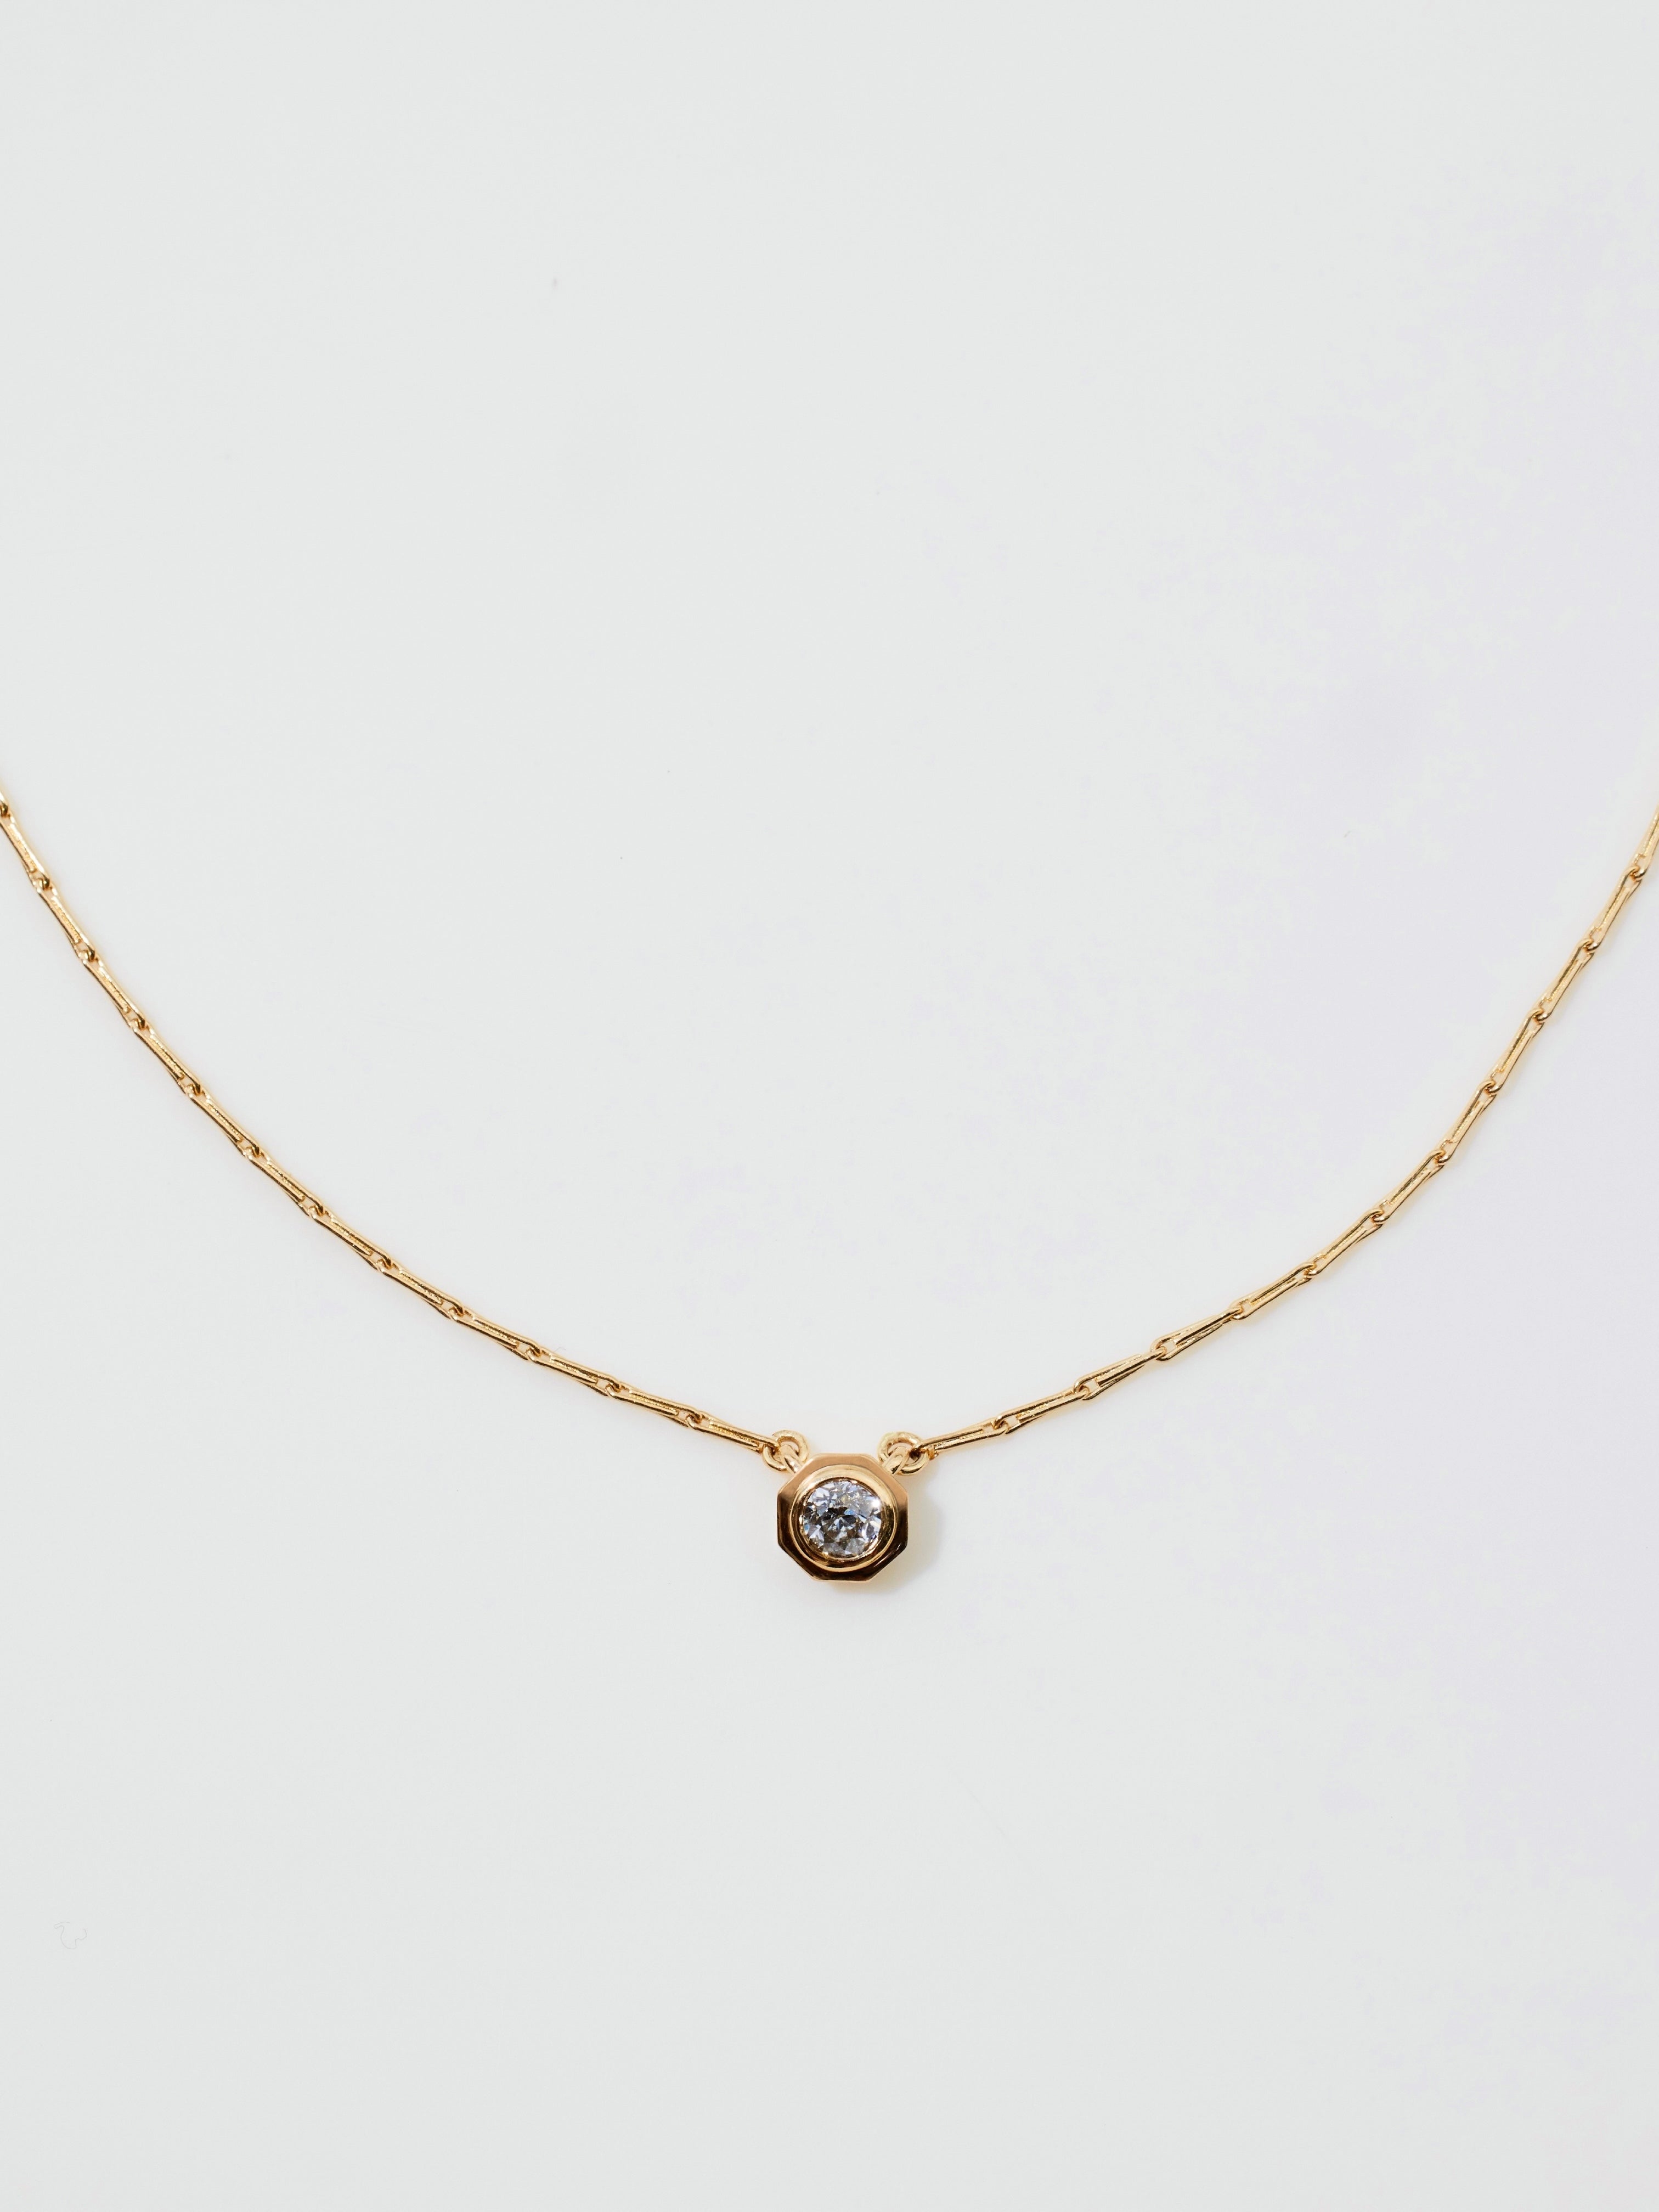 Amoret Diamond Necklace in 18k Yellow, 16"